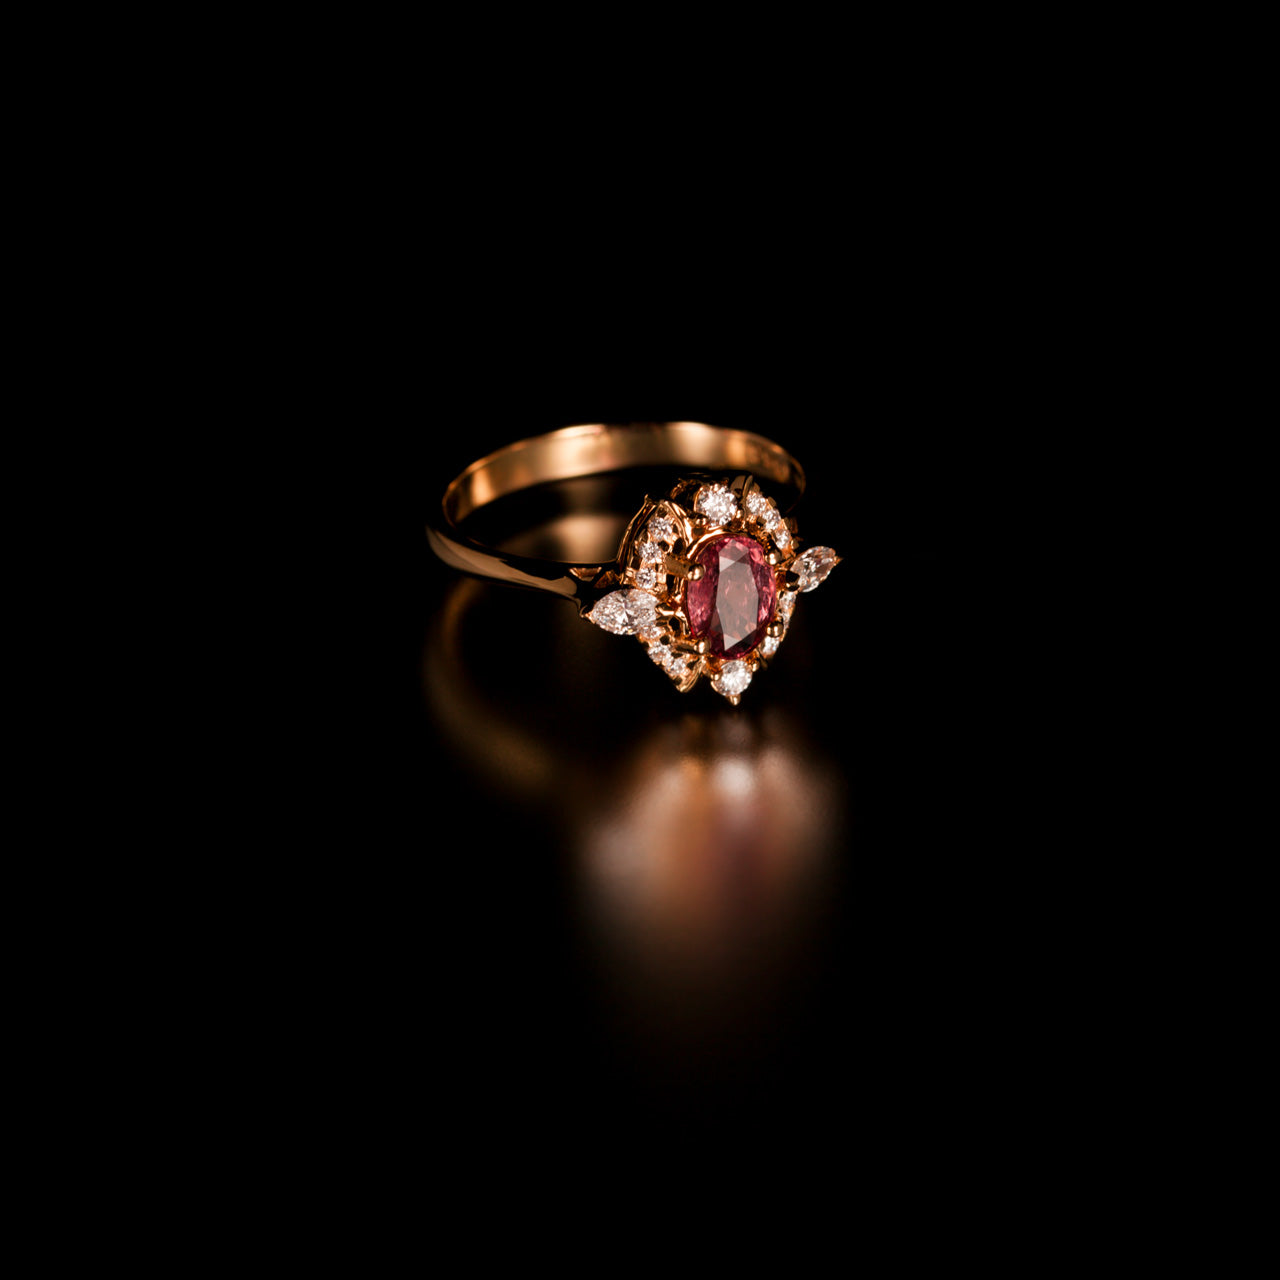 18k yellow gold ring featuring a 0.76ct unheated pink sapphire